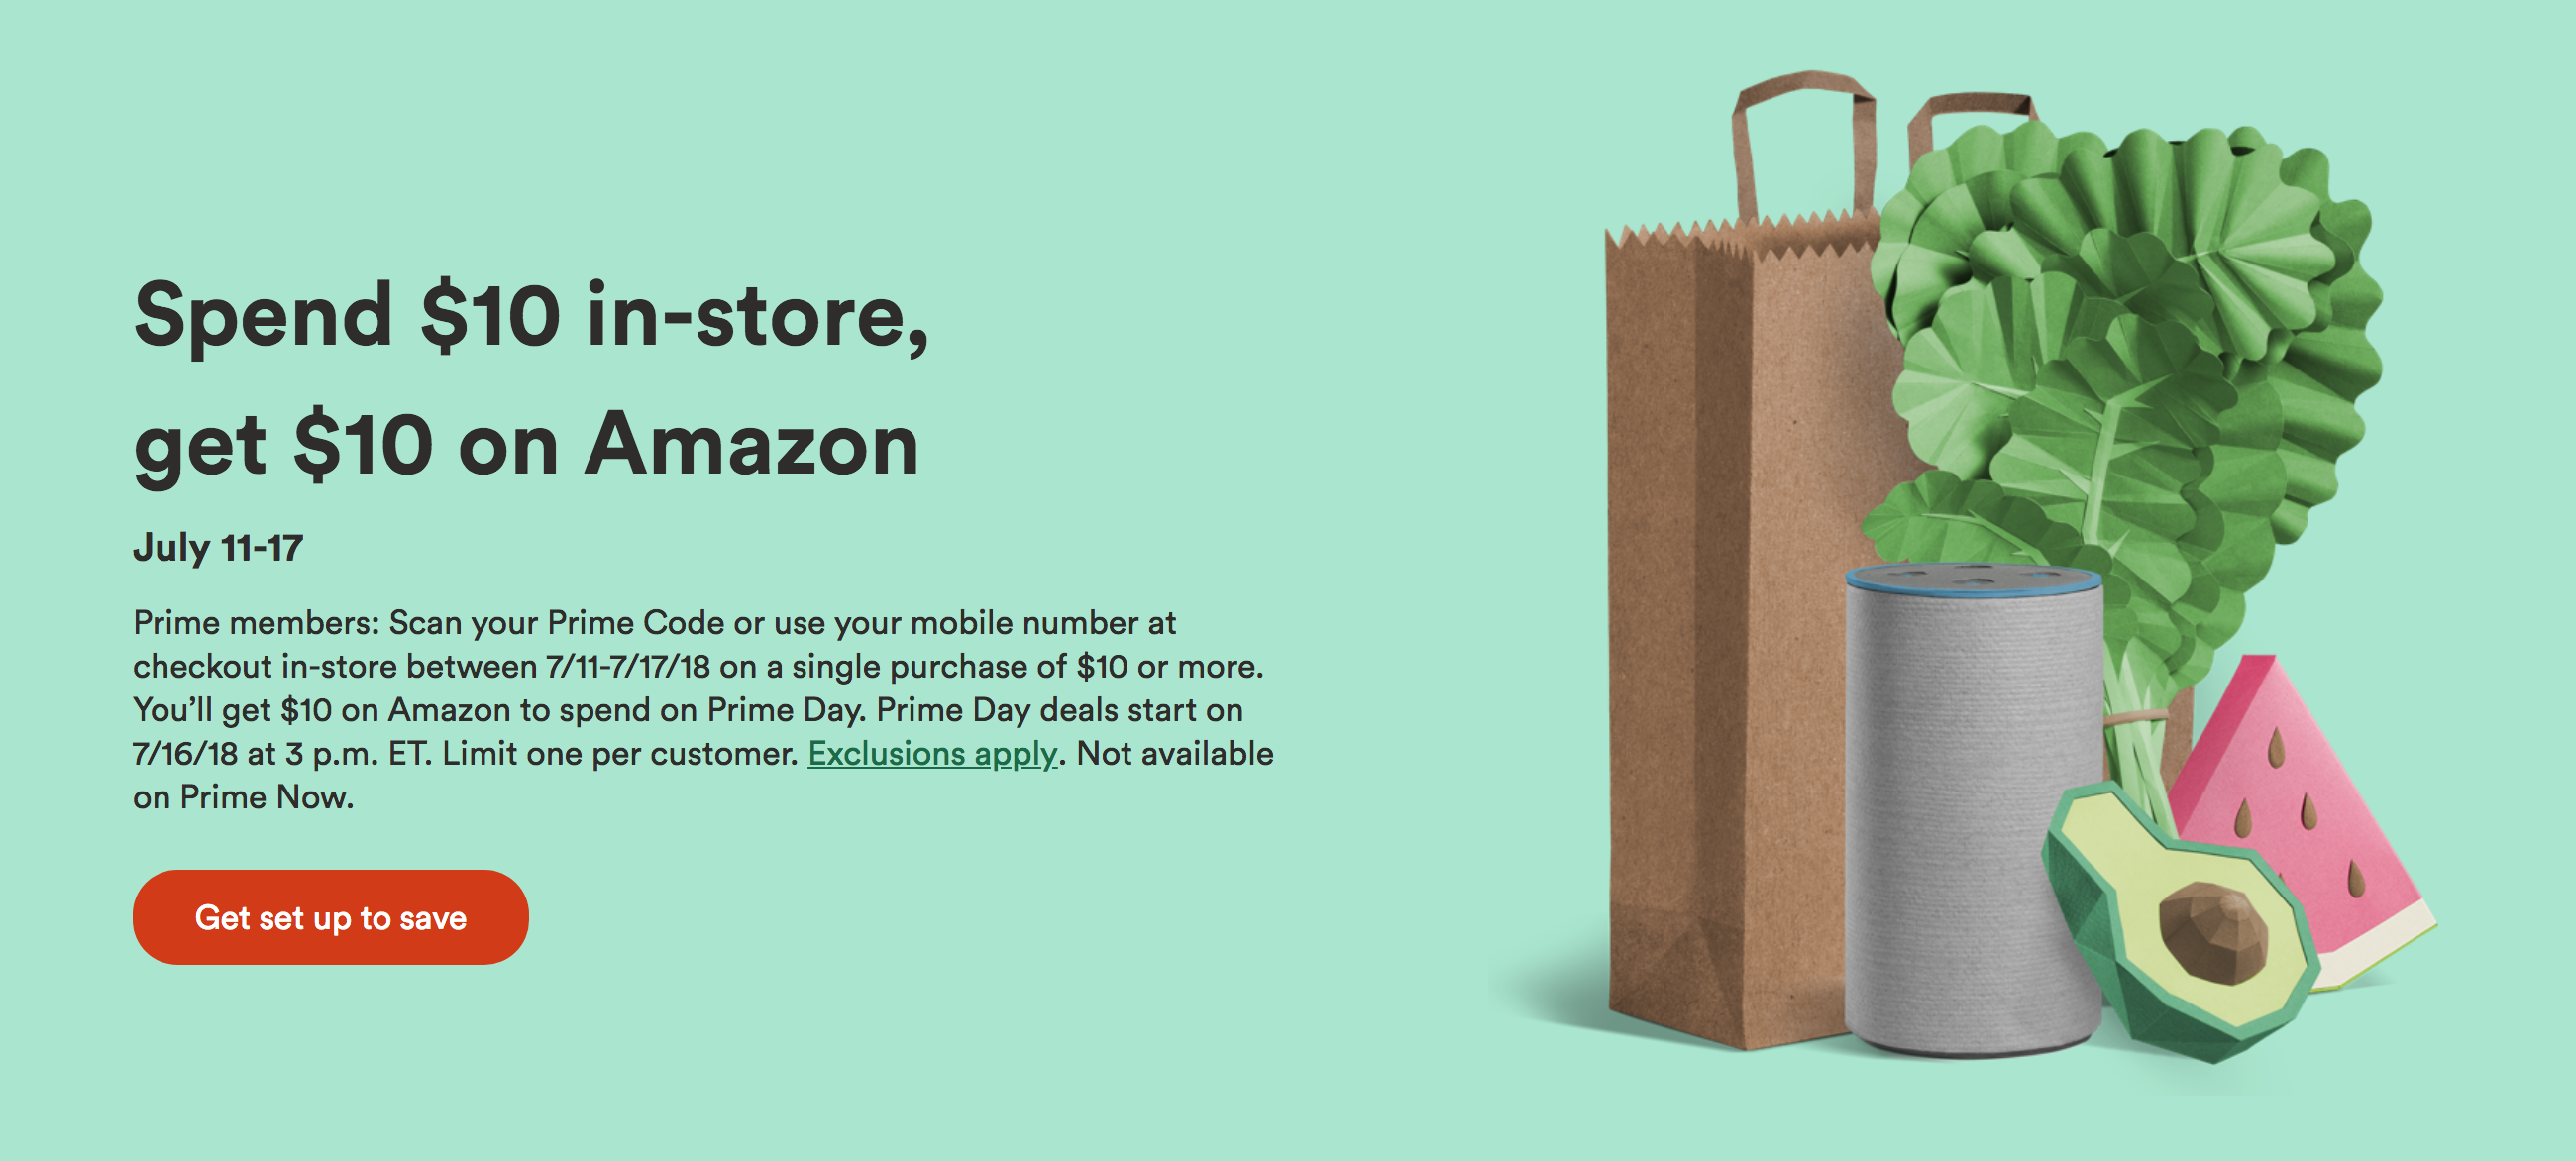 Amazon announces Prime Day perks for Whole Foods shoppers, including